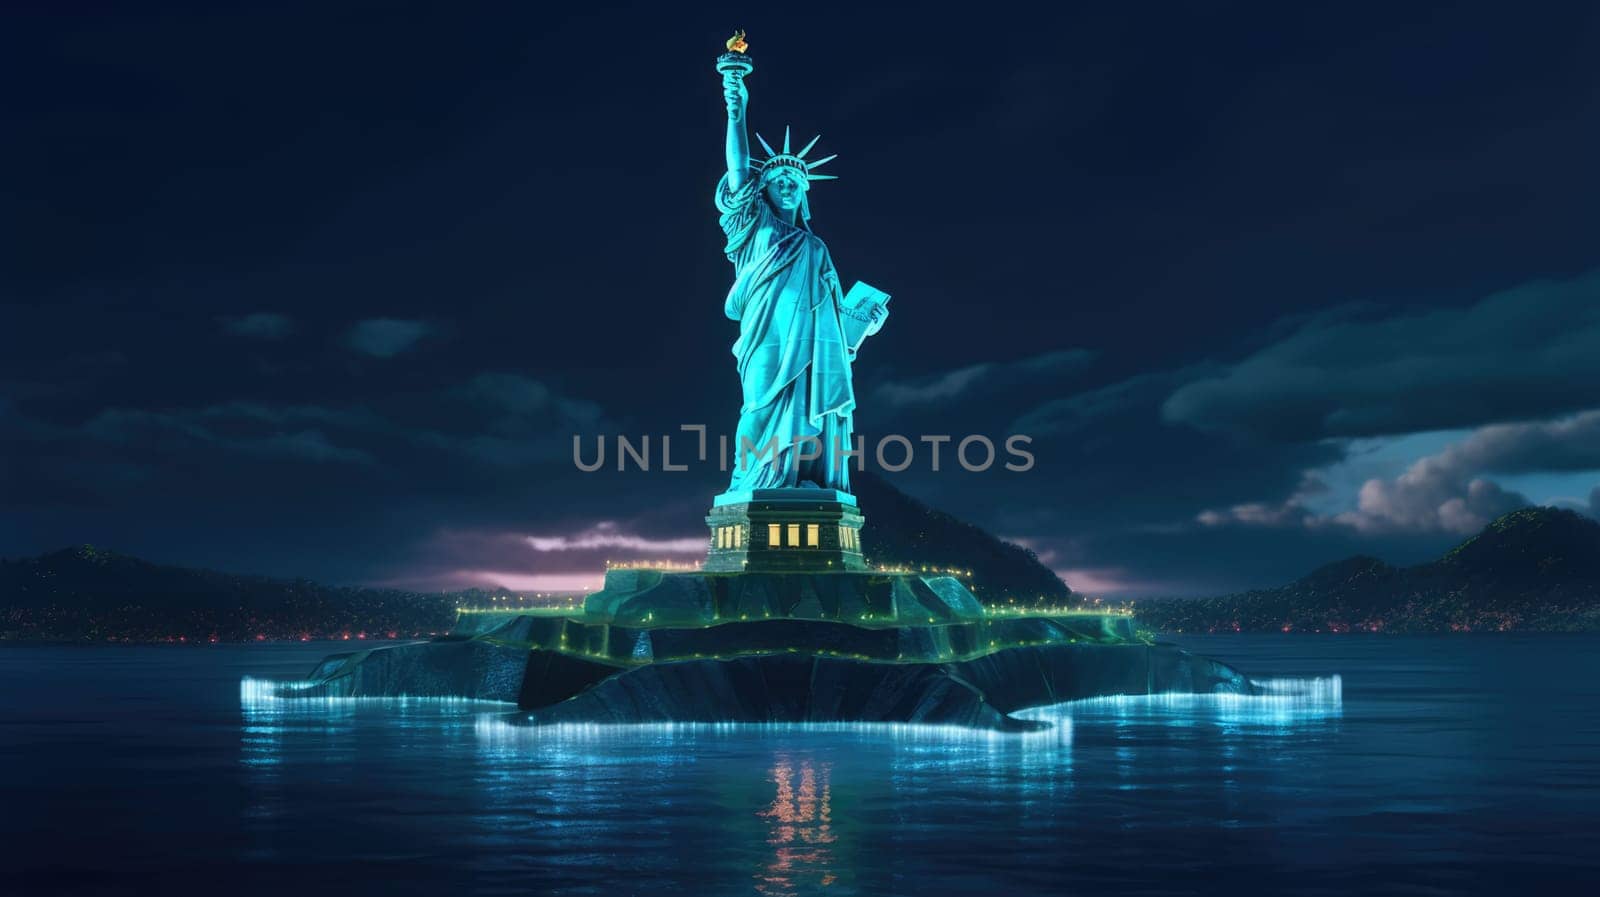 A detailed image of the Statue of Liberty standing tall on a pedestal in the ocean, illuminated with a blue glow. Perfect for projects needing a majestic and inspiring image.